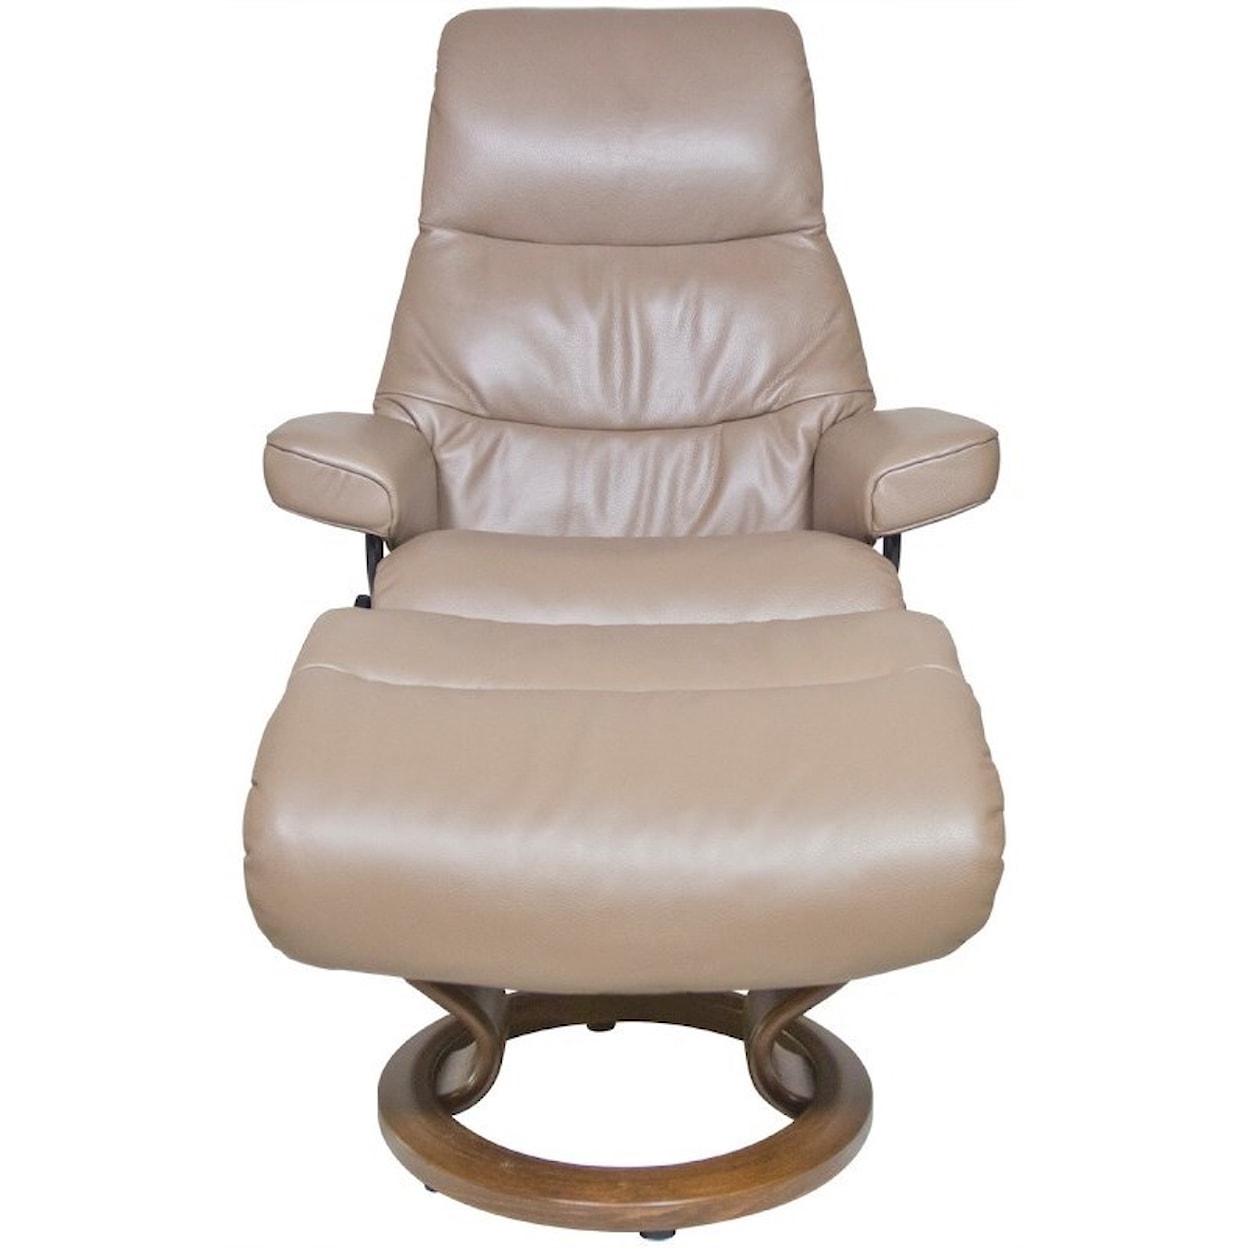 Stressless by Ekornes View Small Chair & Ottoman with Classic Base